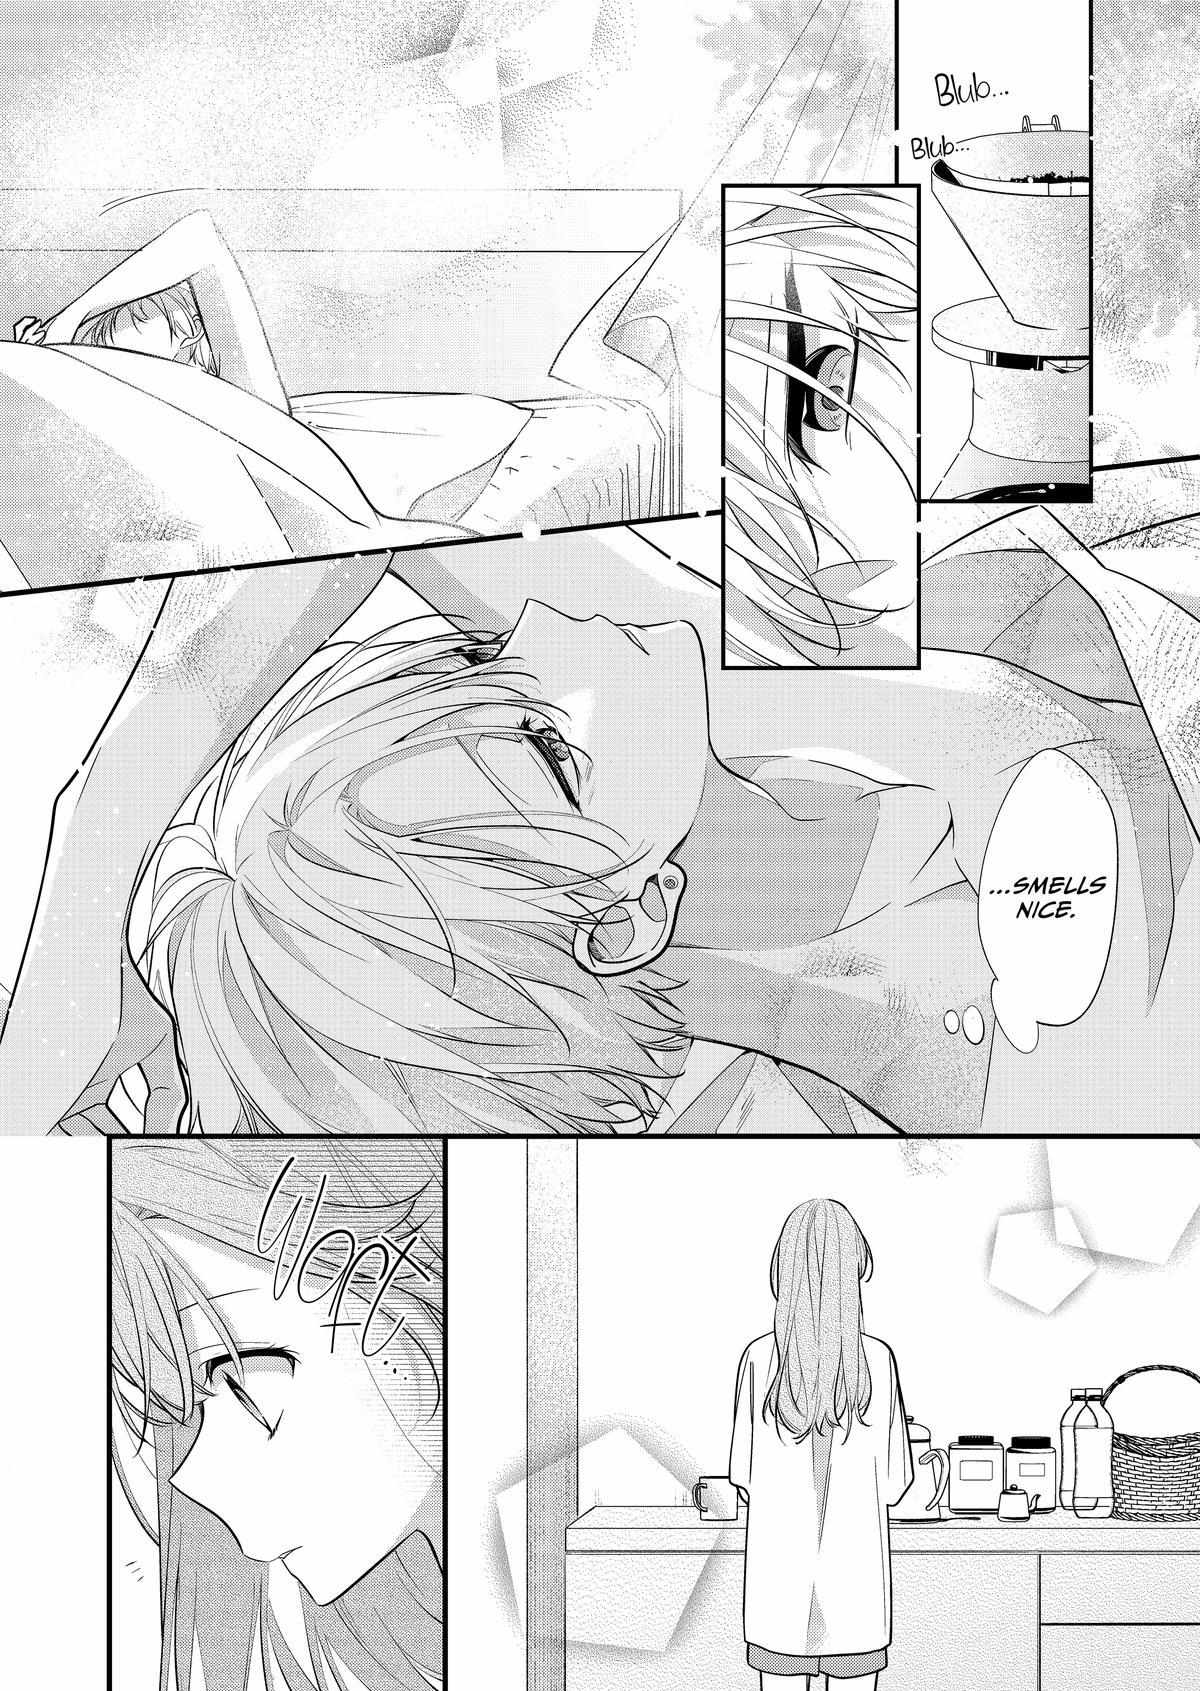 The Story Of A Guy Who Fell In Love With His Friend's Sister - Page 2